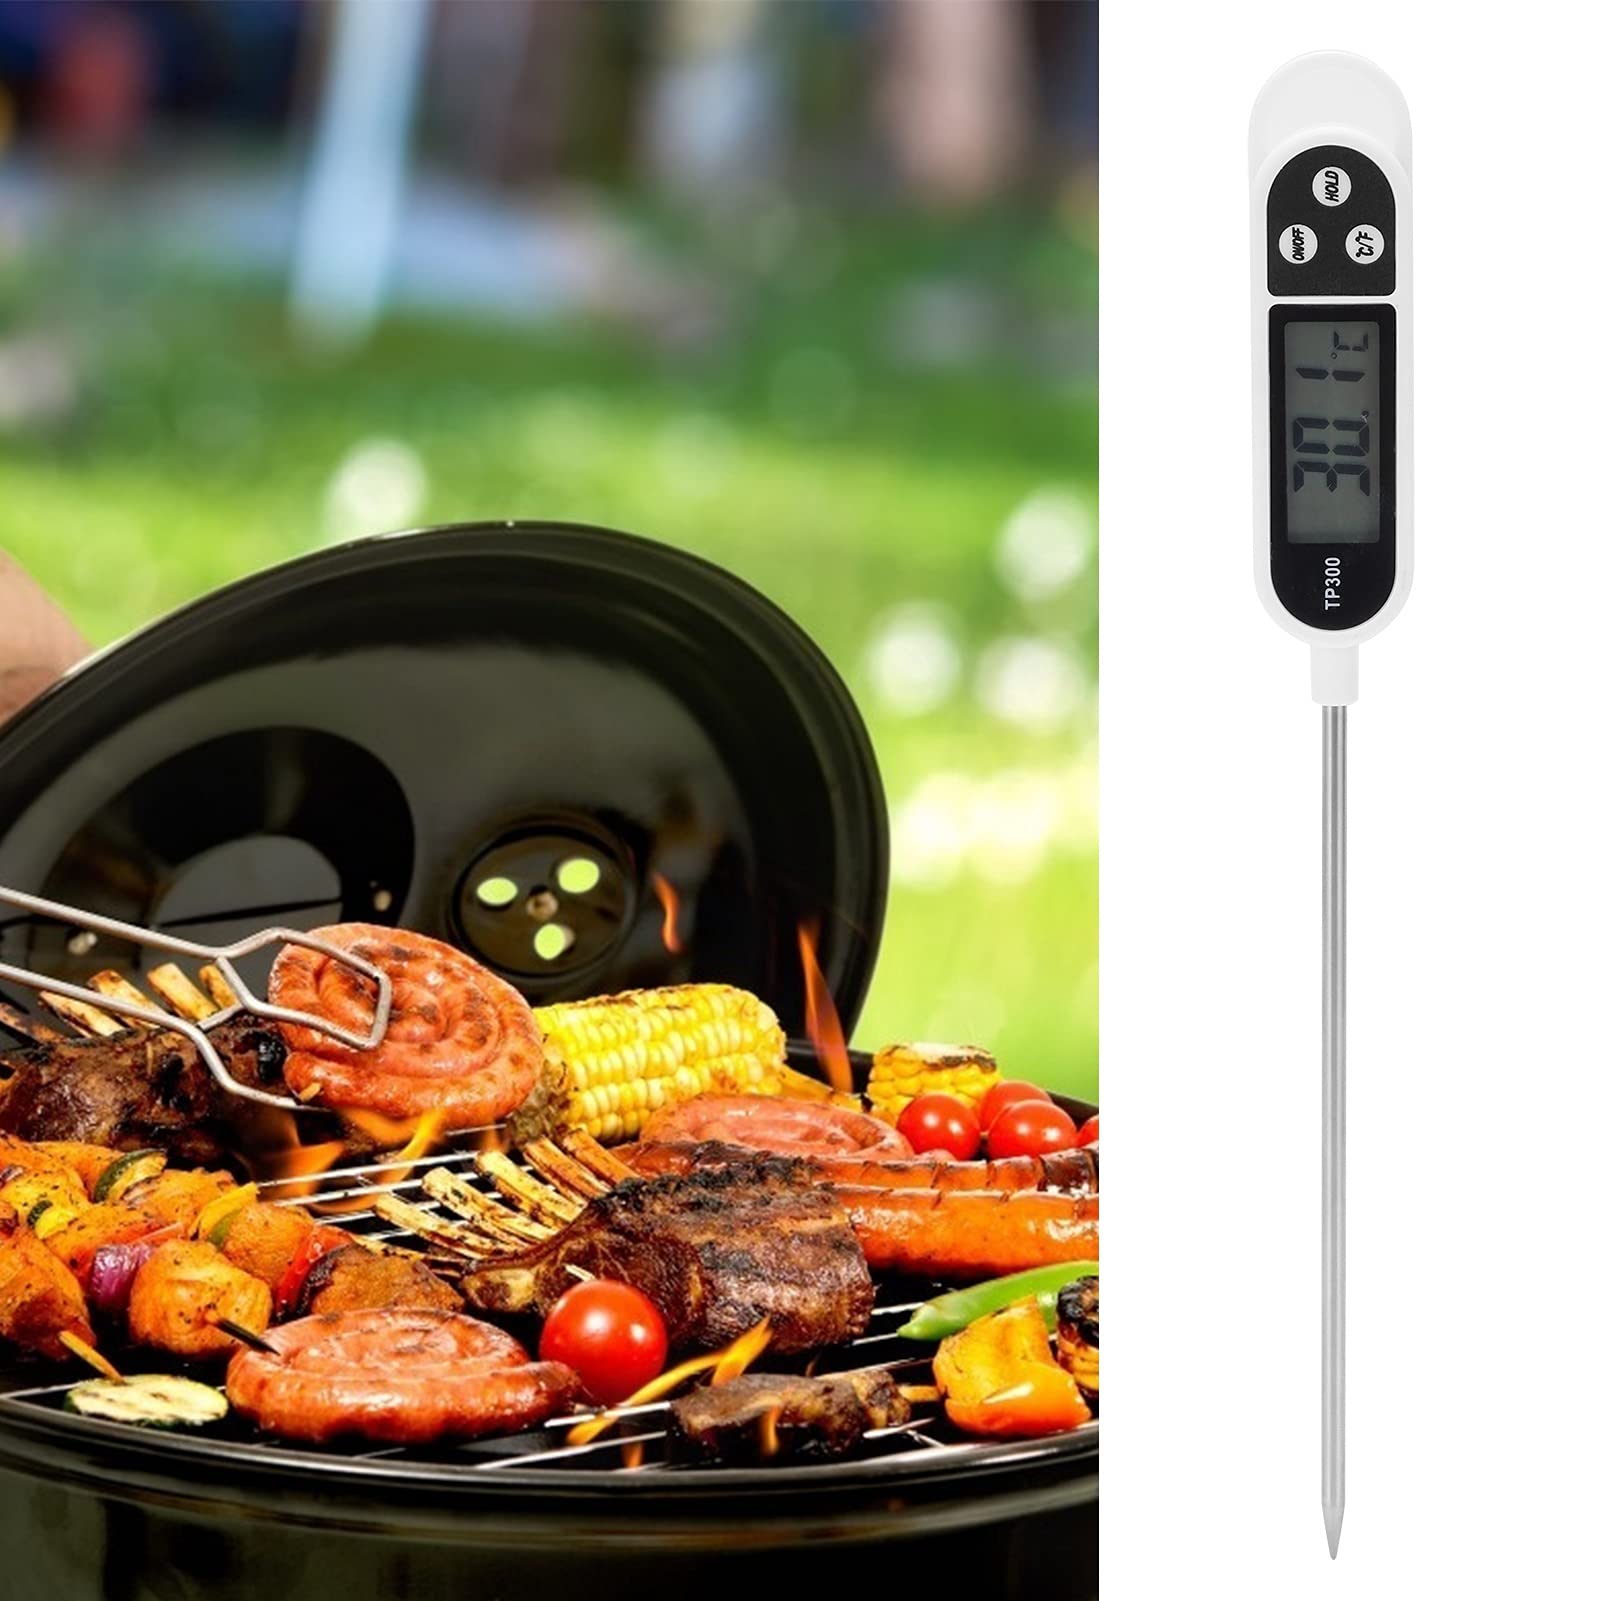 Portable Digital Cooking Meat Thermometer Waterproof Food Oil Water Temperature Meter for Home Kitchen